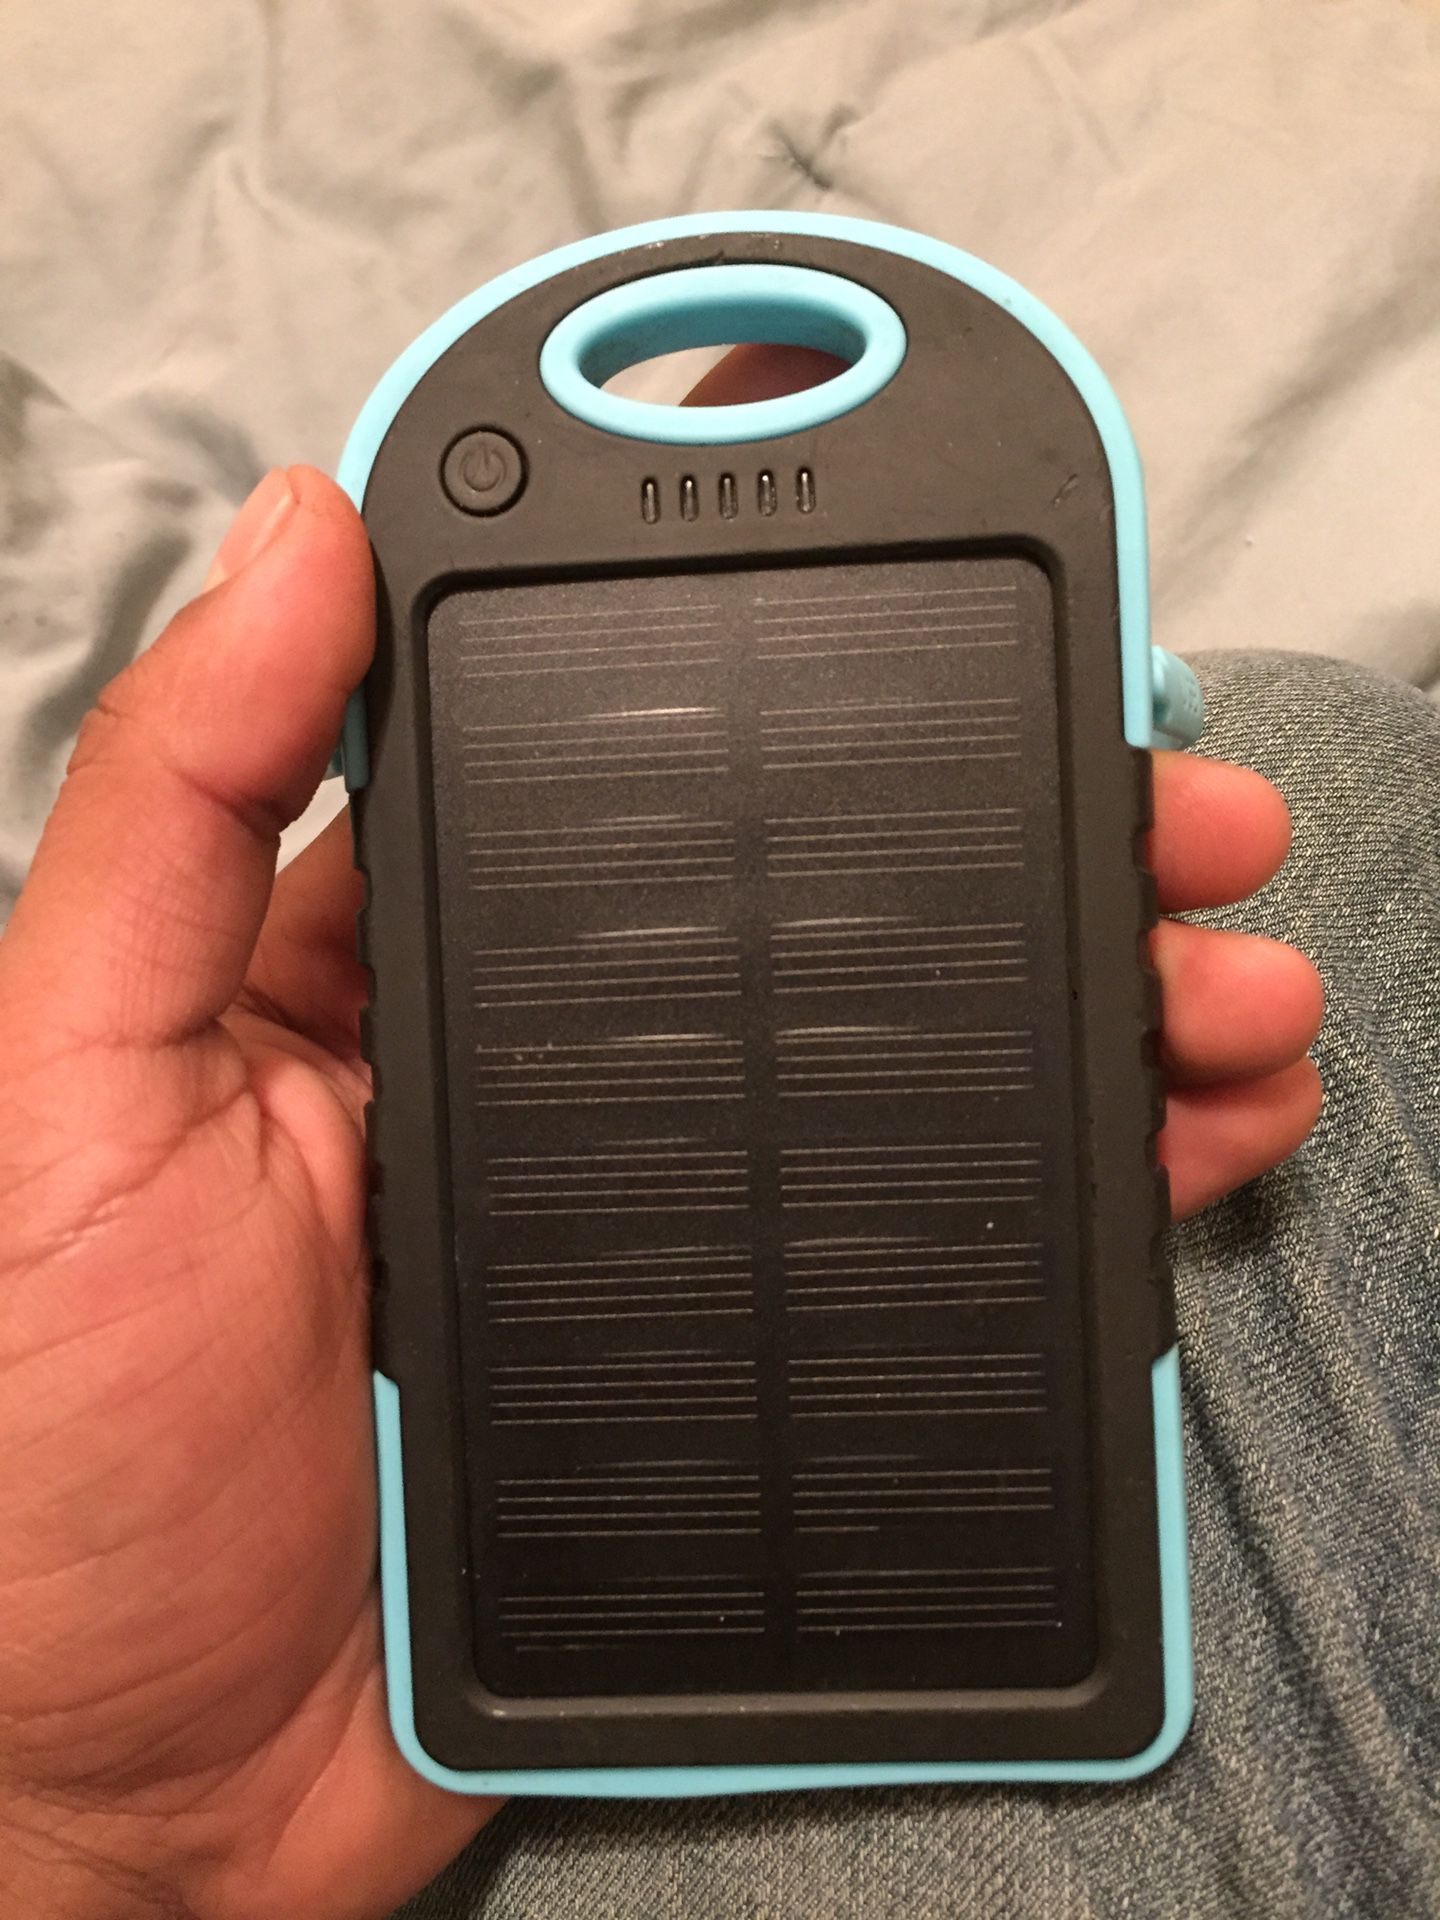 Solar powered Portable phone charger